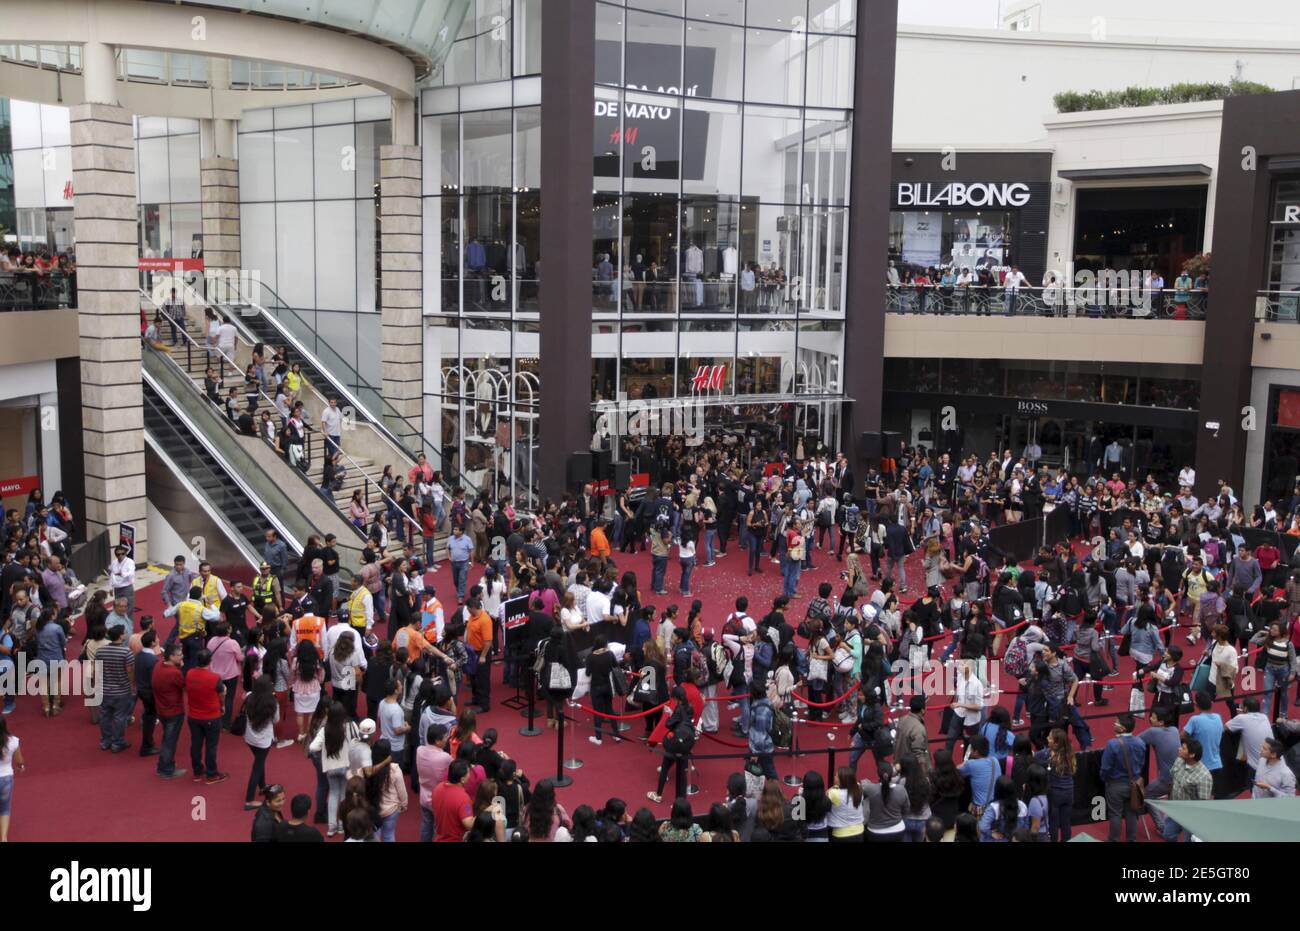 Shoppers queue to enter the newly opened Hennes & Mauritz (H&M) store in  Peru, at the Jockey Plaza mall in Lima, May 9, 2015. Swedish fashion giant  H&M, one of the world's